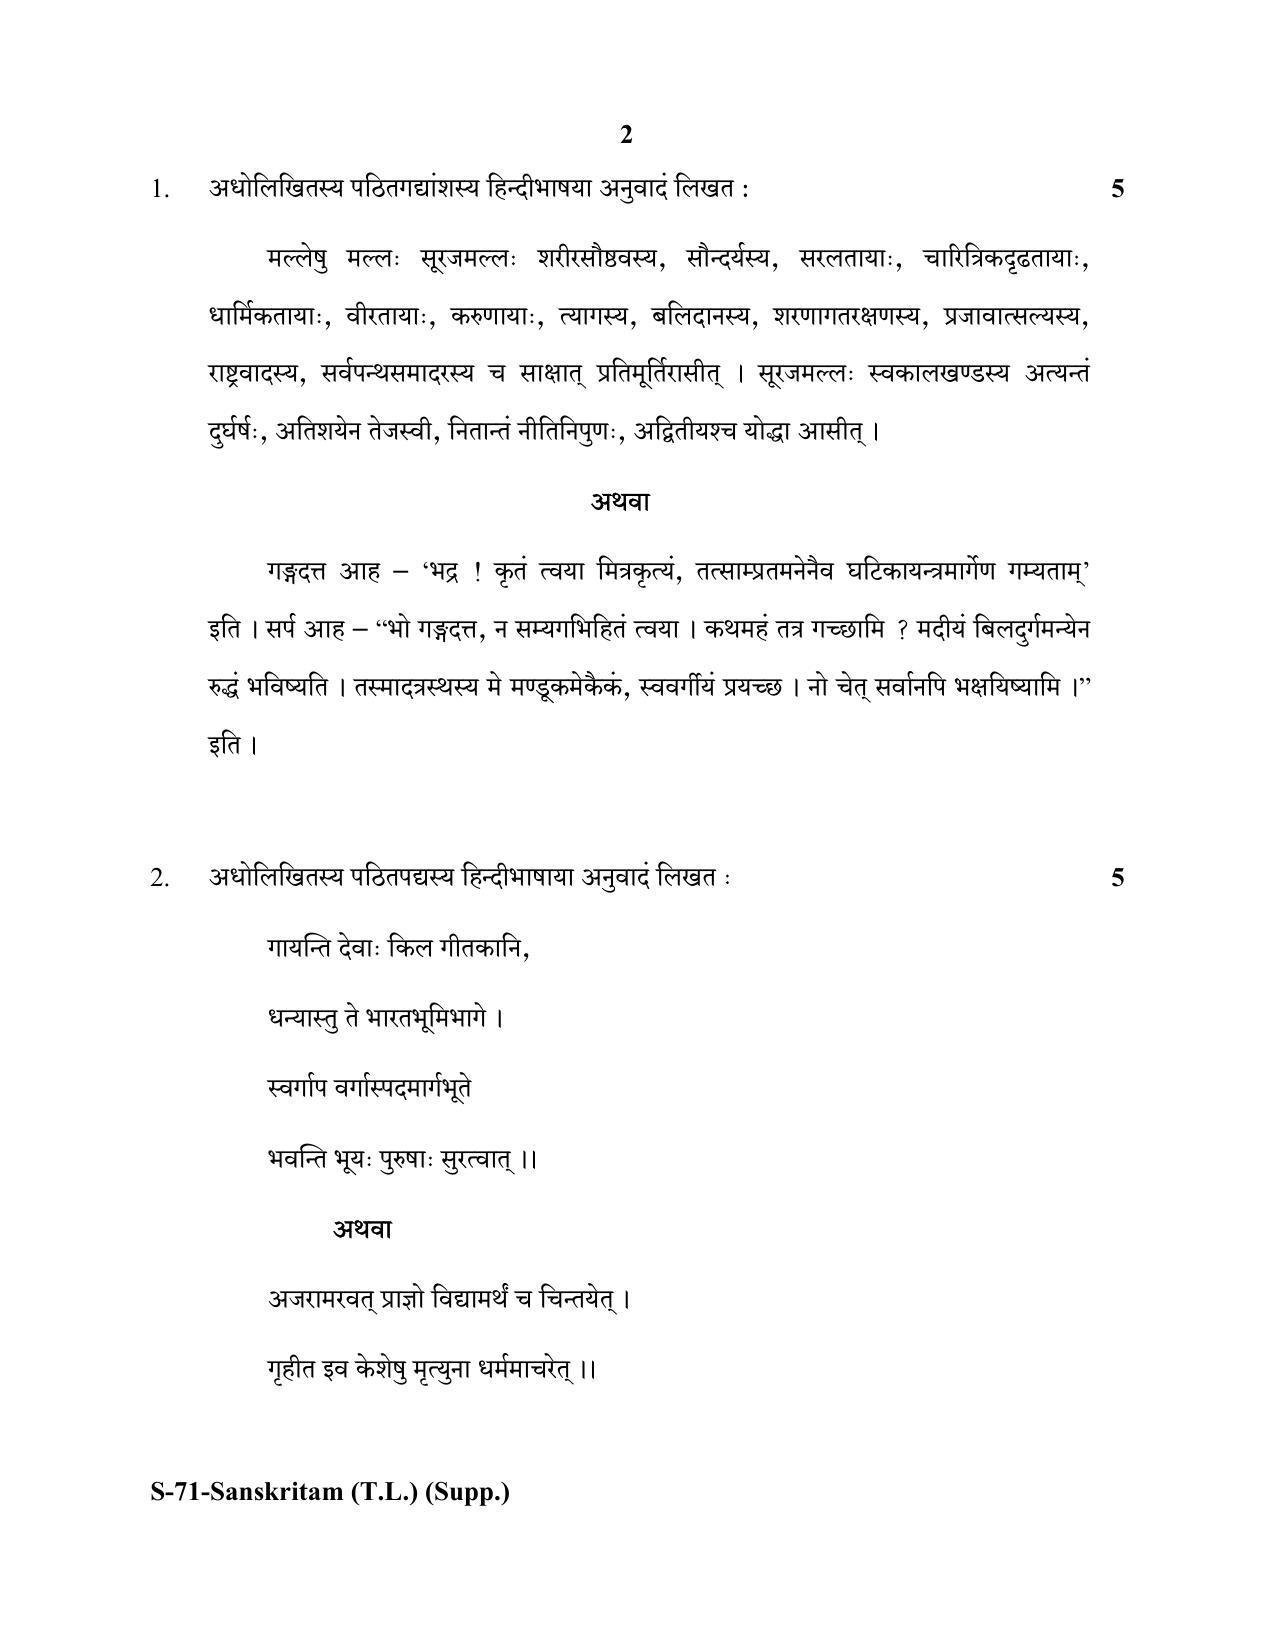 RBSE Class 10 Sanskrit TL Supplementary 2020 Question Paper - Page 2